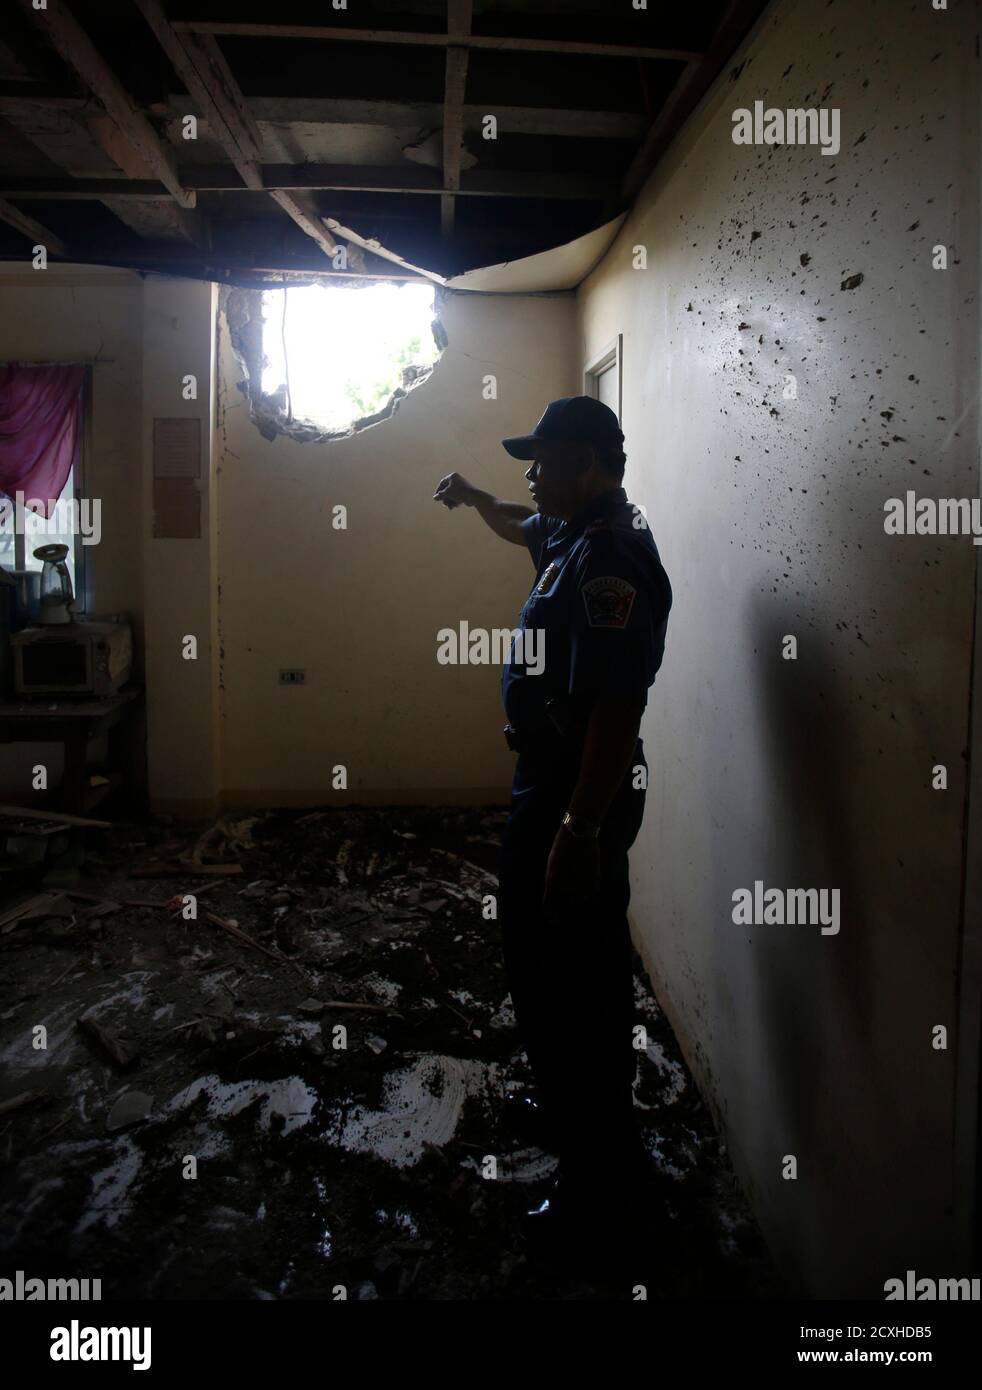 A policeman inspects a house damaged by a mortar round from Muslim rebels of Moro National Liberation Front (MNLF) positions, in Zamboanga city, southern Philippines September 21, 2013. Fighting between Philippine forces and Muslim rebels in in Zamboanga city has been confined to just two areas and should be over soon, President Benigno Aquino said on Thursday. According to a police spokesperson, the mortar round killed one individual. REUTERS/Erik De Castro (PHILIPPINES - Tags: CIVIL UNREST CONFLICT POLITICS) Stock Photo